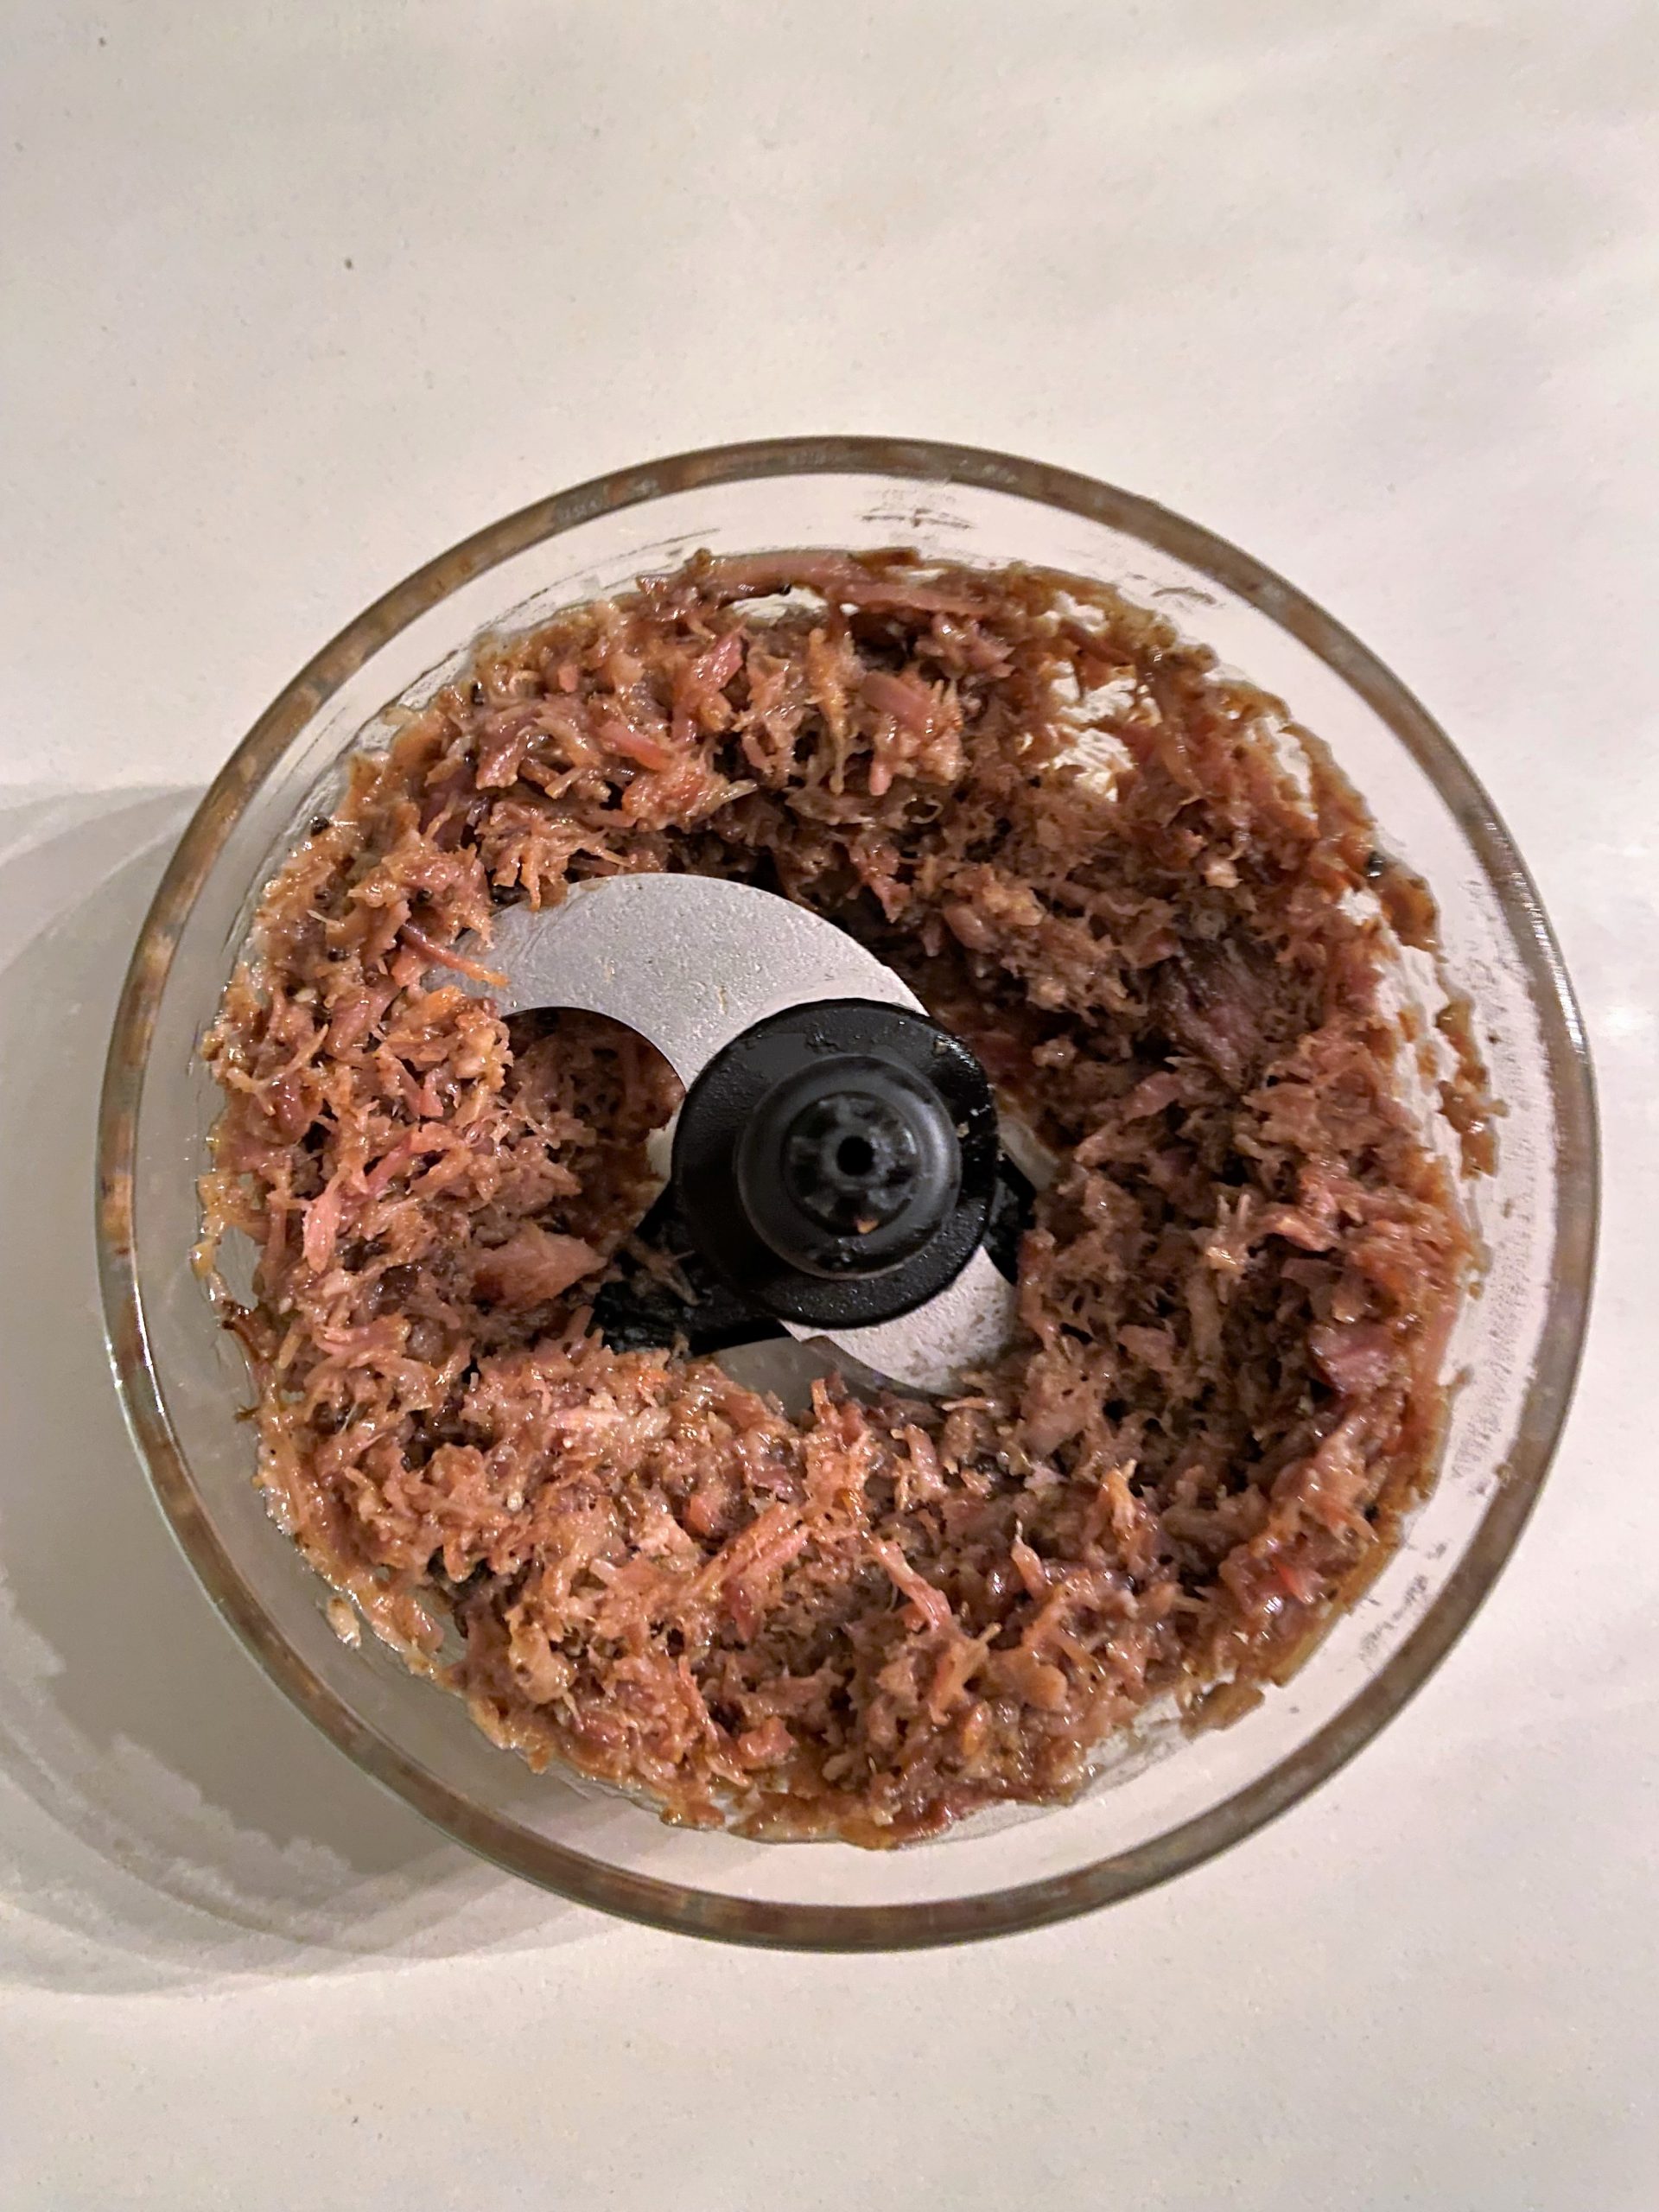 shred the pork confit in a food processor